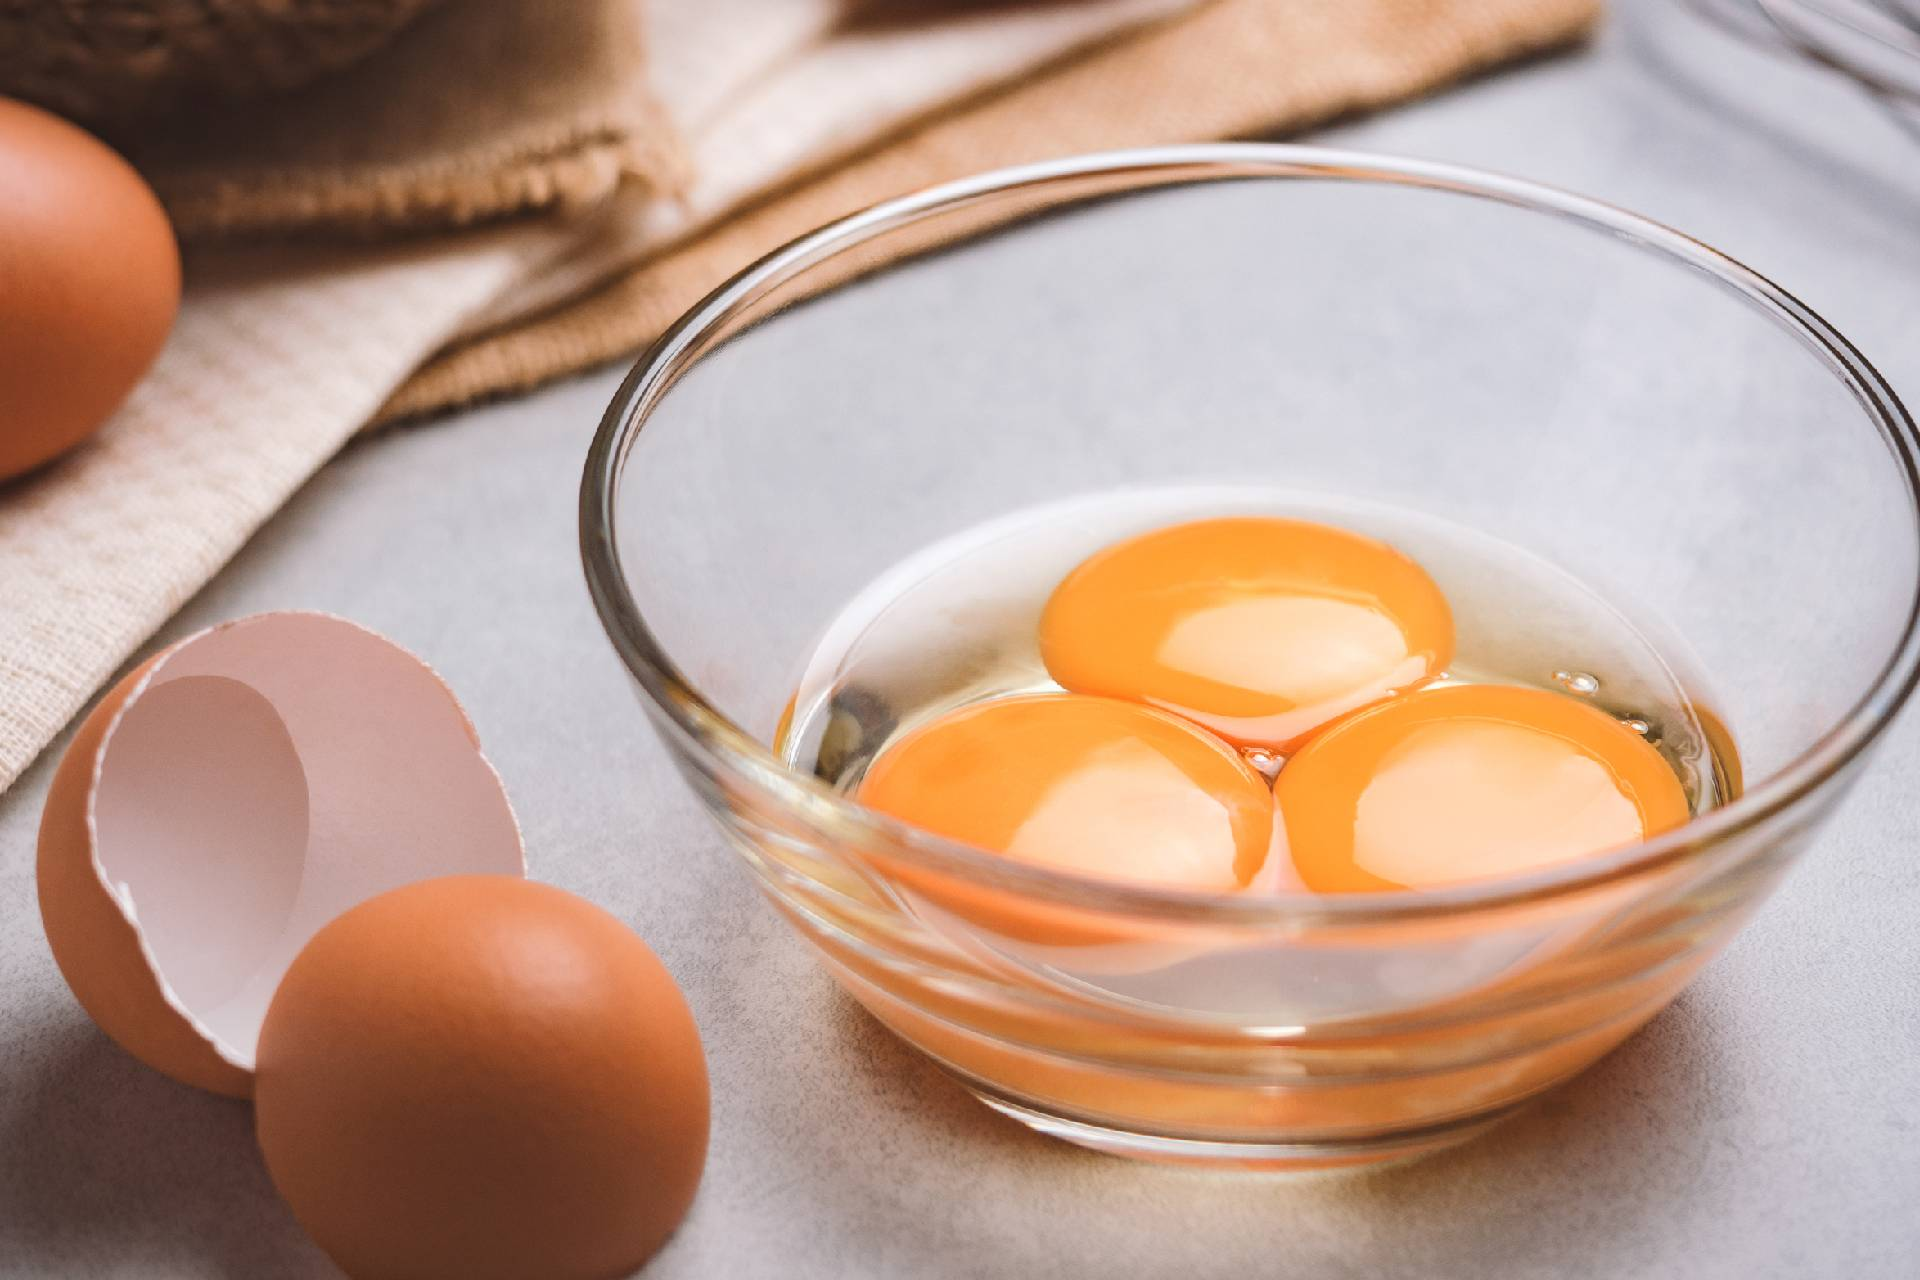 Source: Fine Dining Lovers - What to do With Leftover Egg Yolk